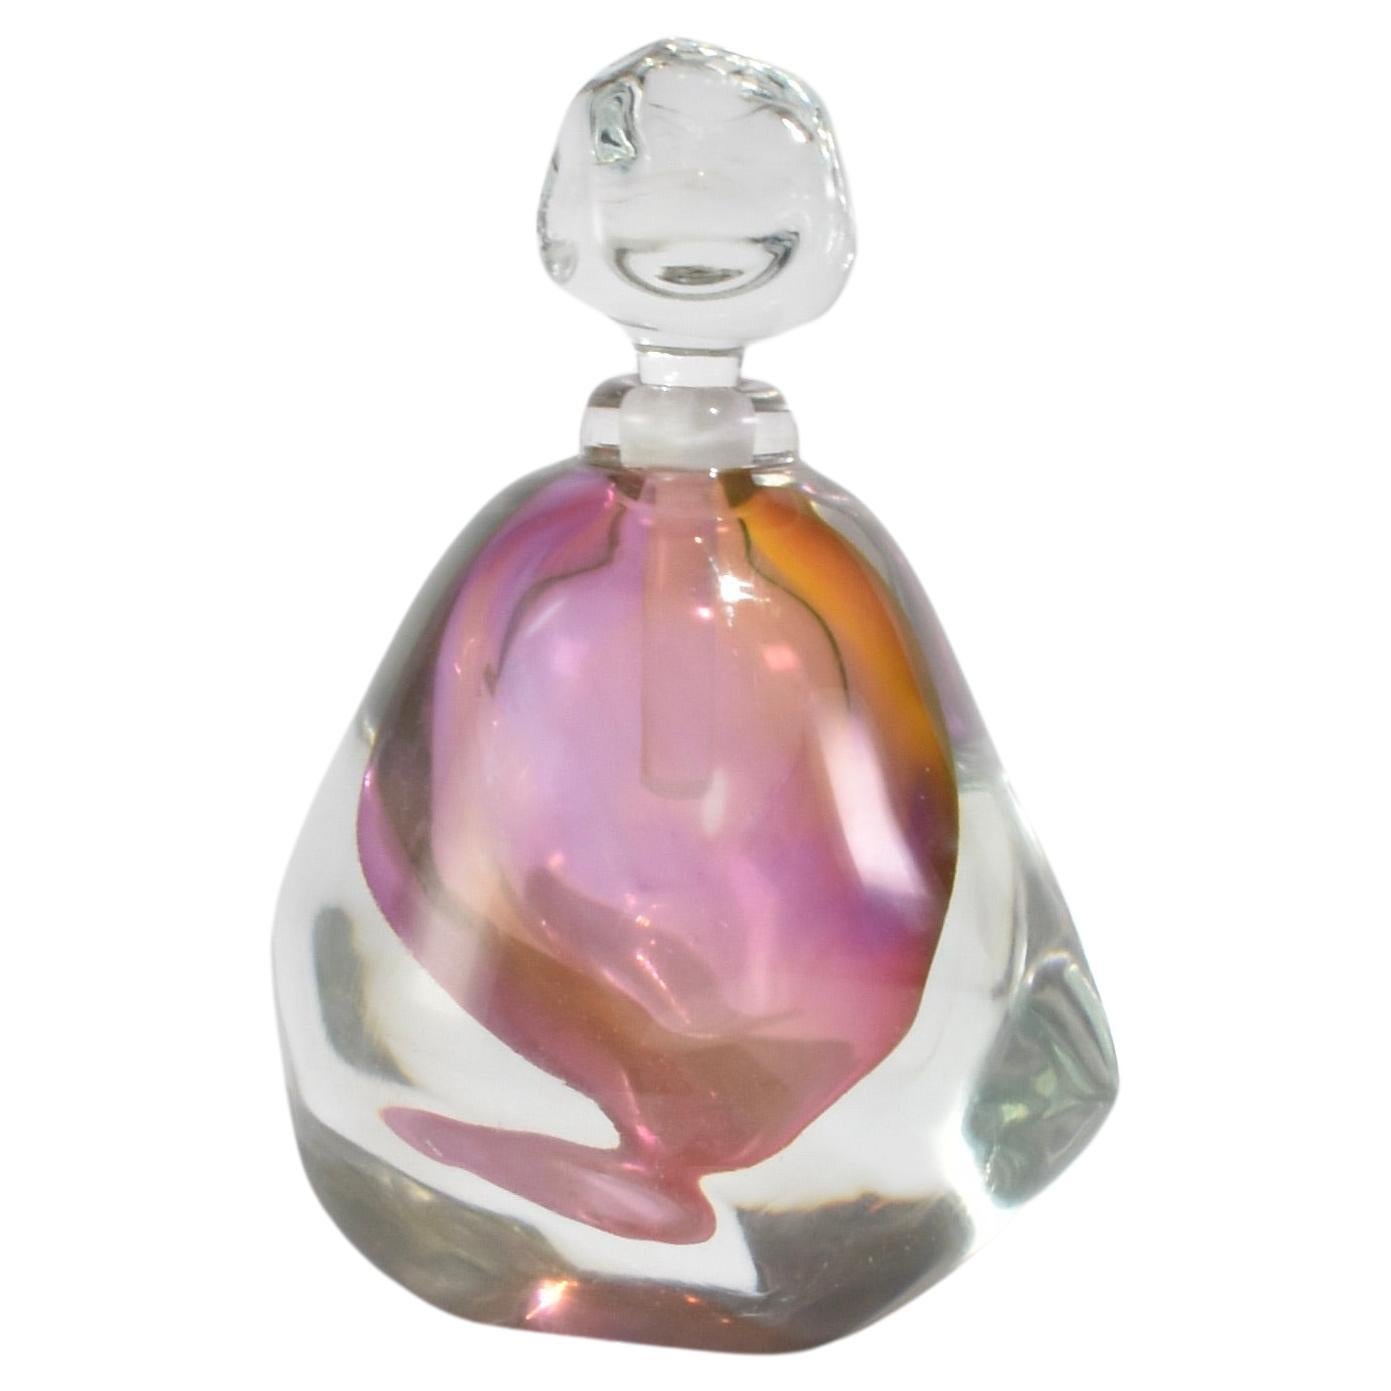 Colorful Perfume Bottle For Sale